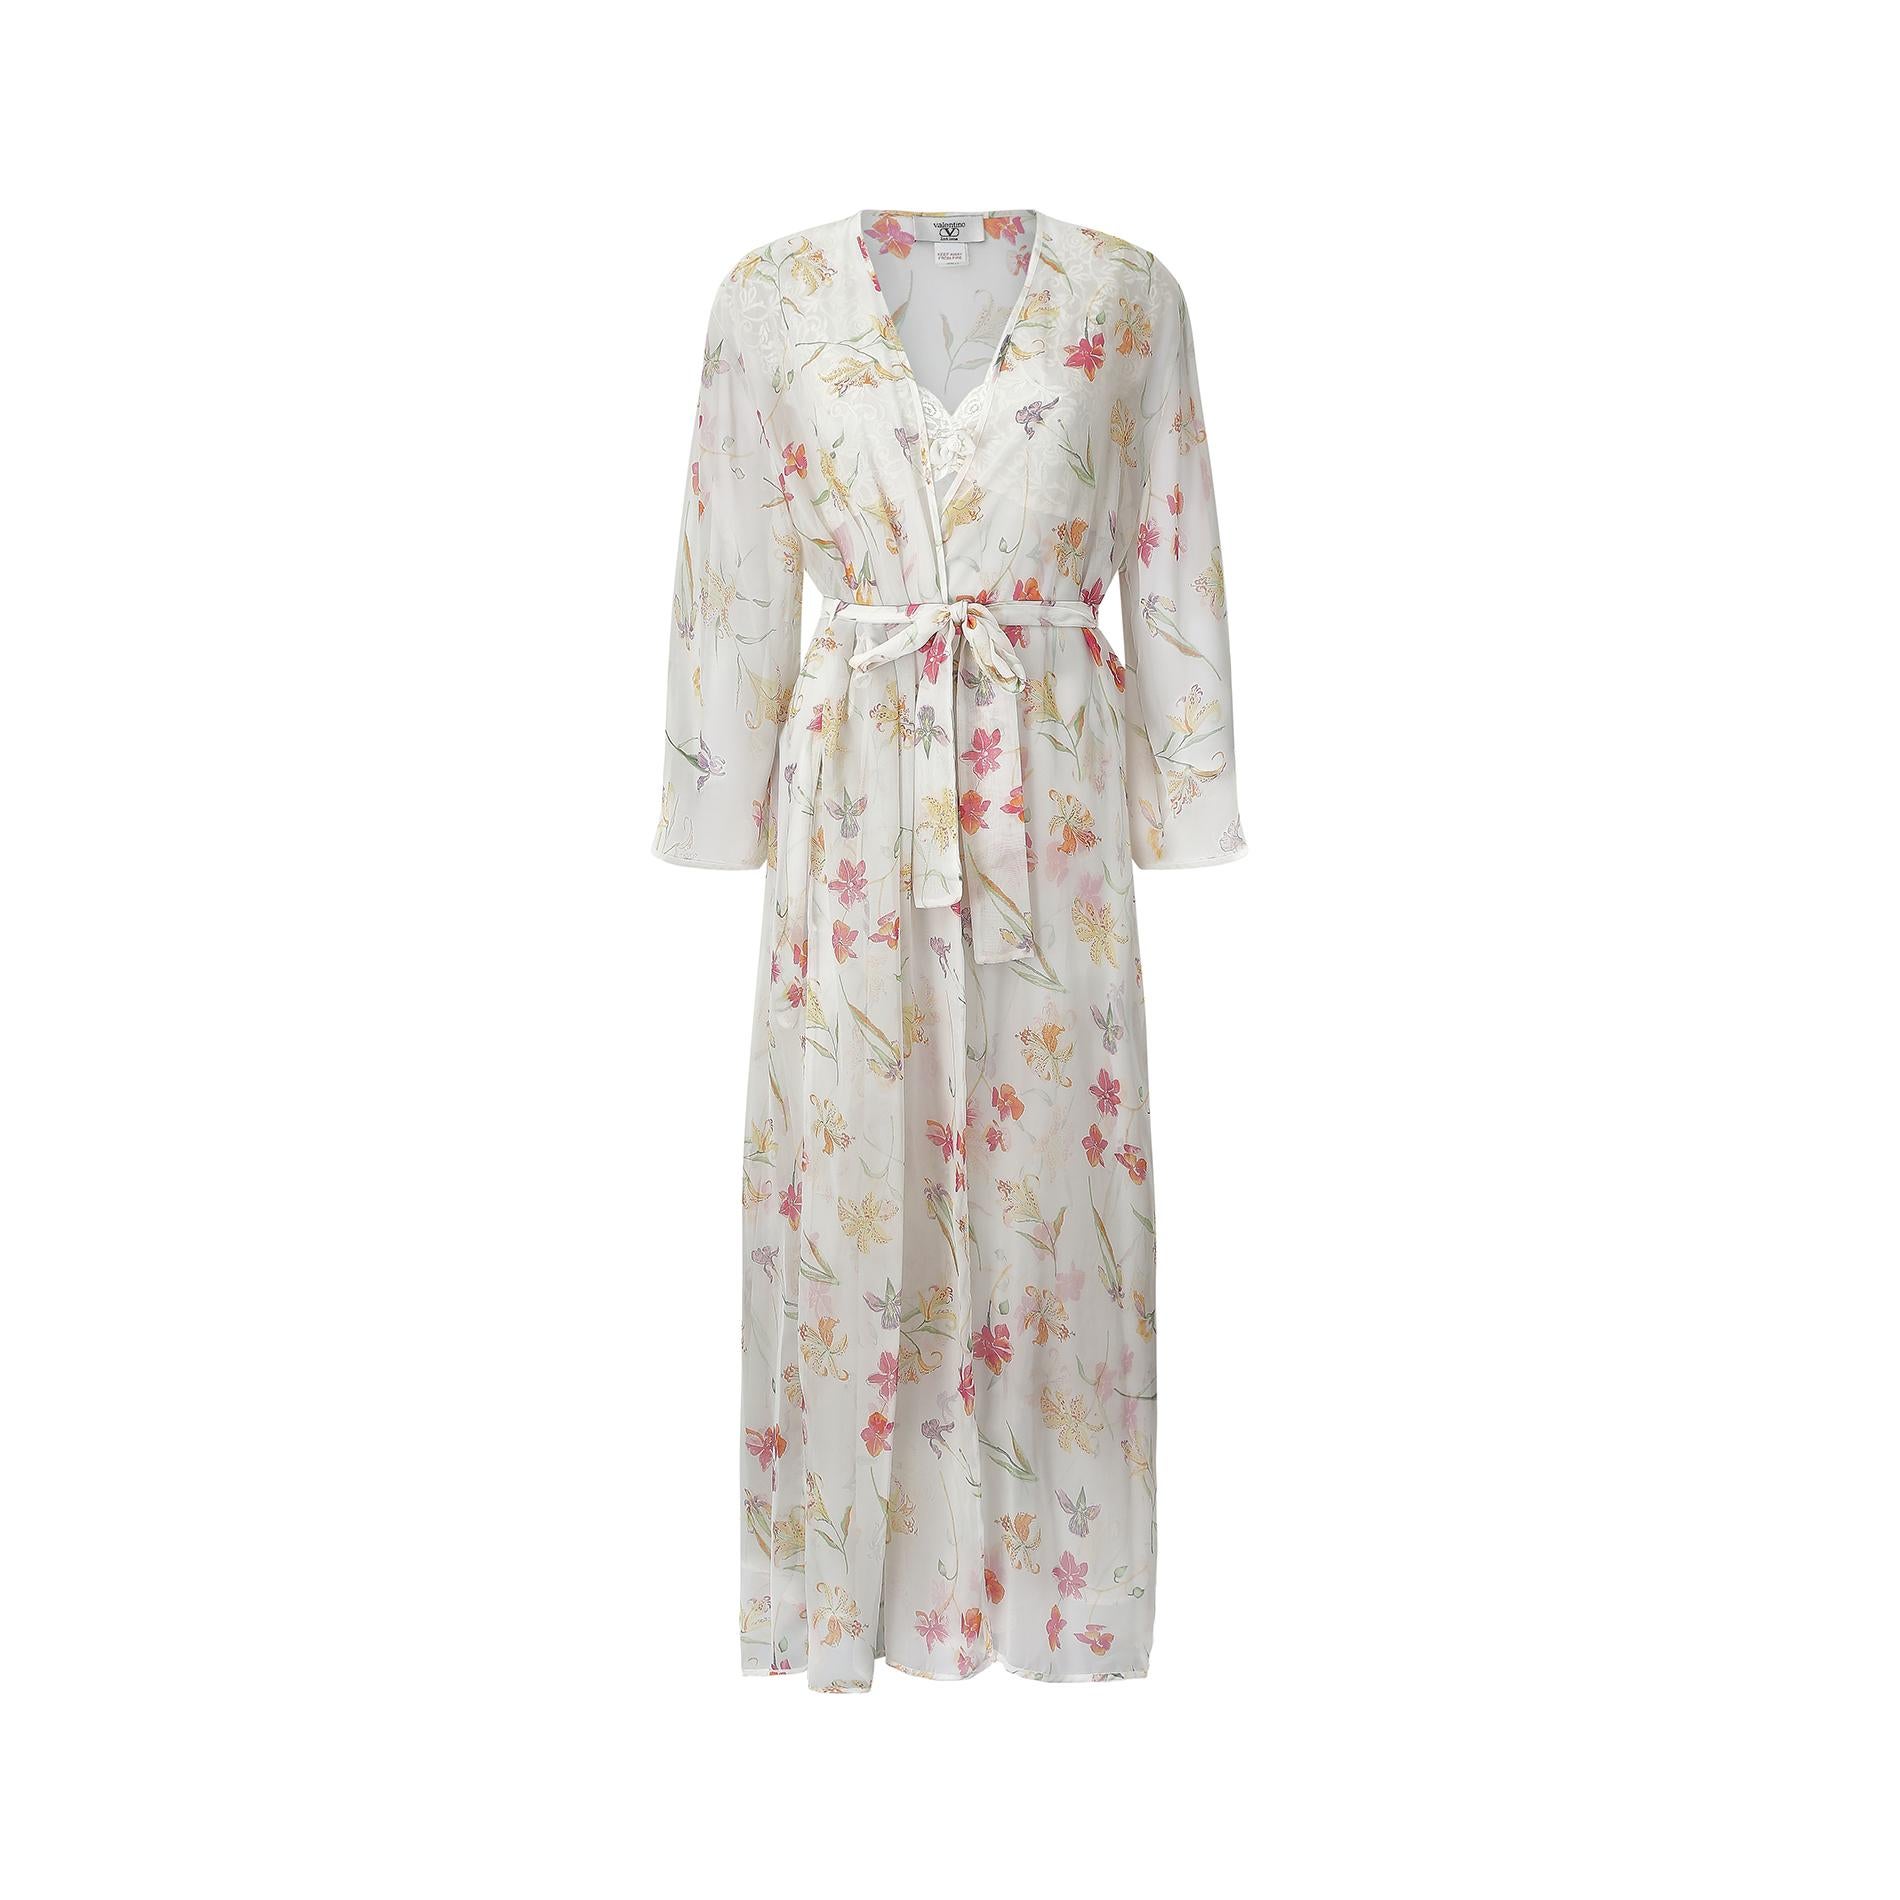 This 1990s Valentino lingerie set features a floral and lace trimmed slip dress and a matching dressing gown with floaty sleeves, both in a beautifully soft Georgette crepe fabric. The dress has an unlined lace bust, with a deep V to both front and